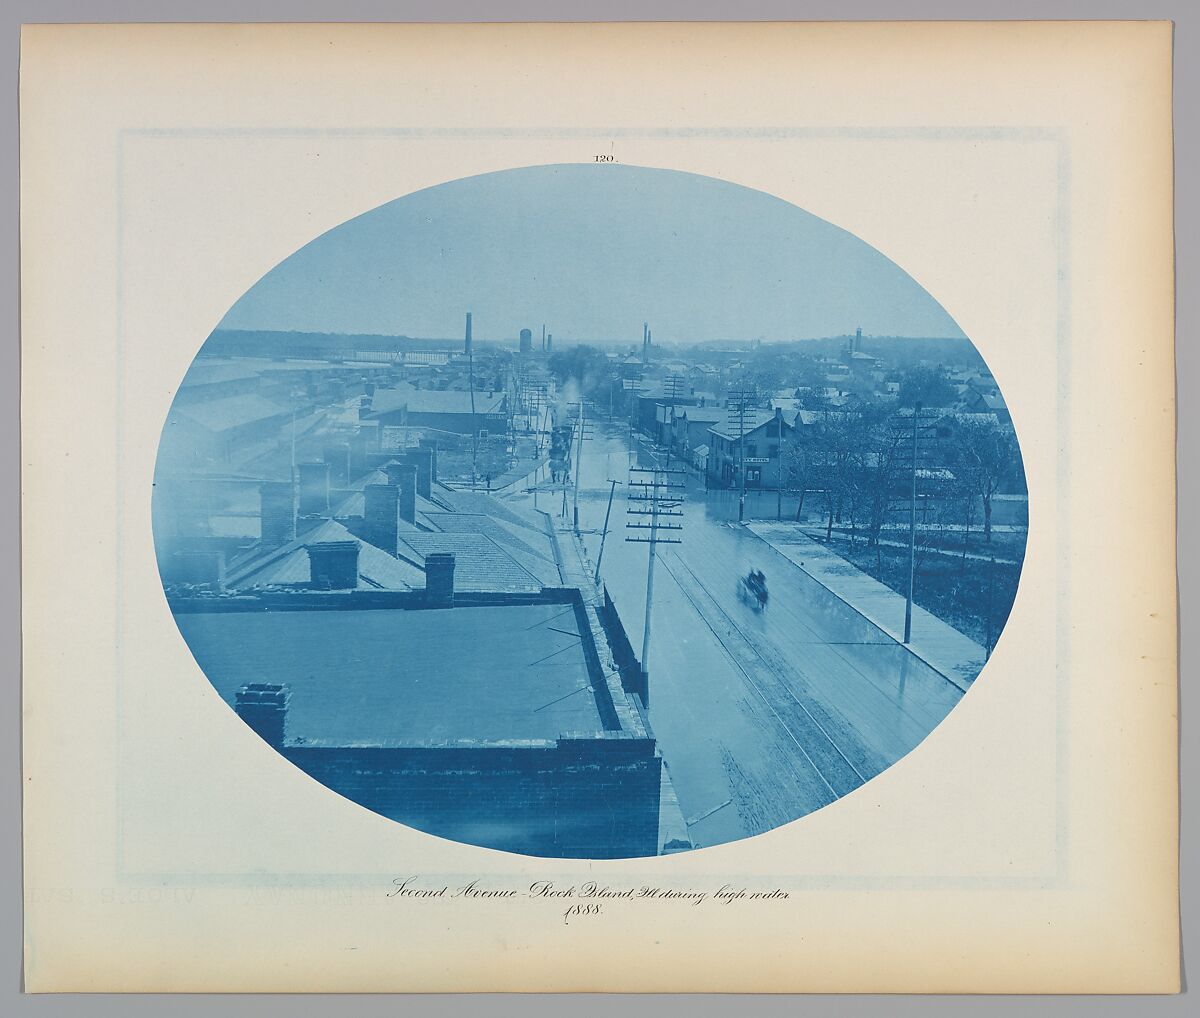 Second Ave Rock Island, Ill. during high water, Henry P. Bosse  American, born Germany, Cyanotype